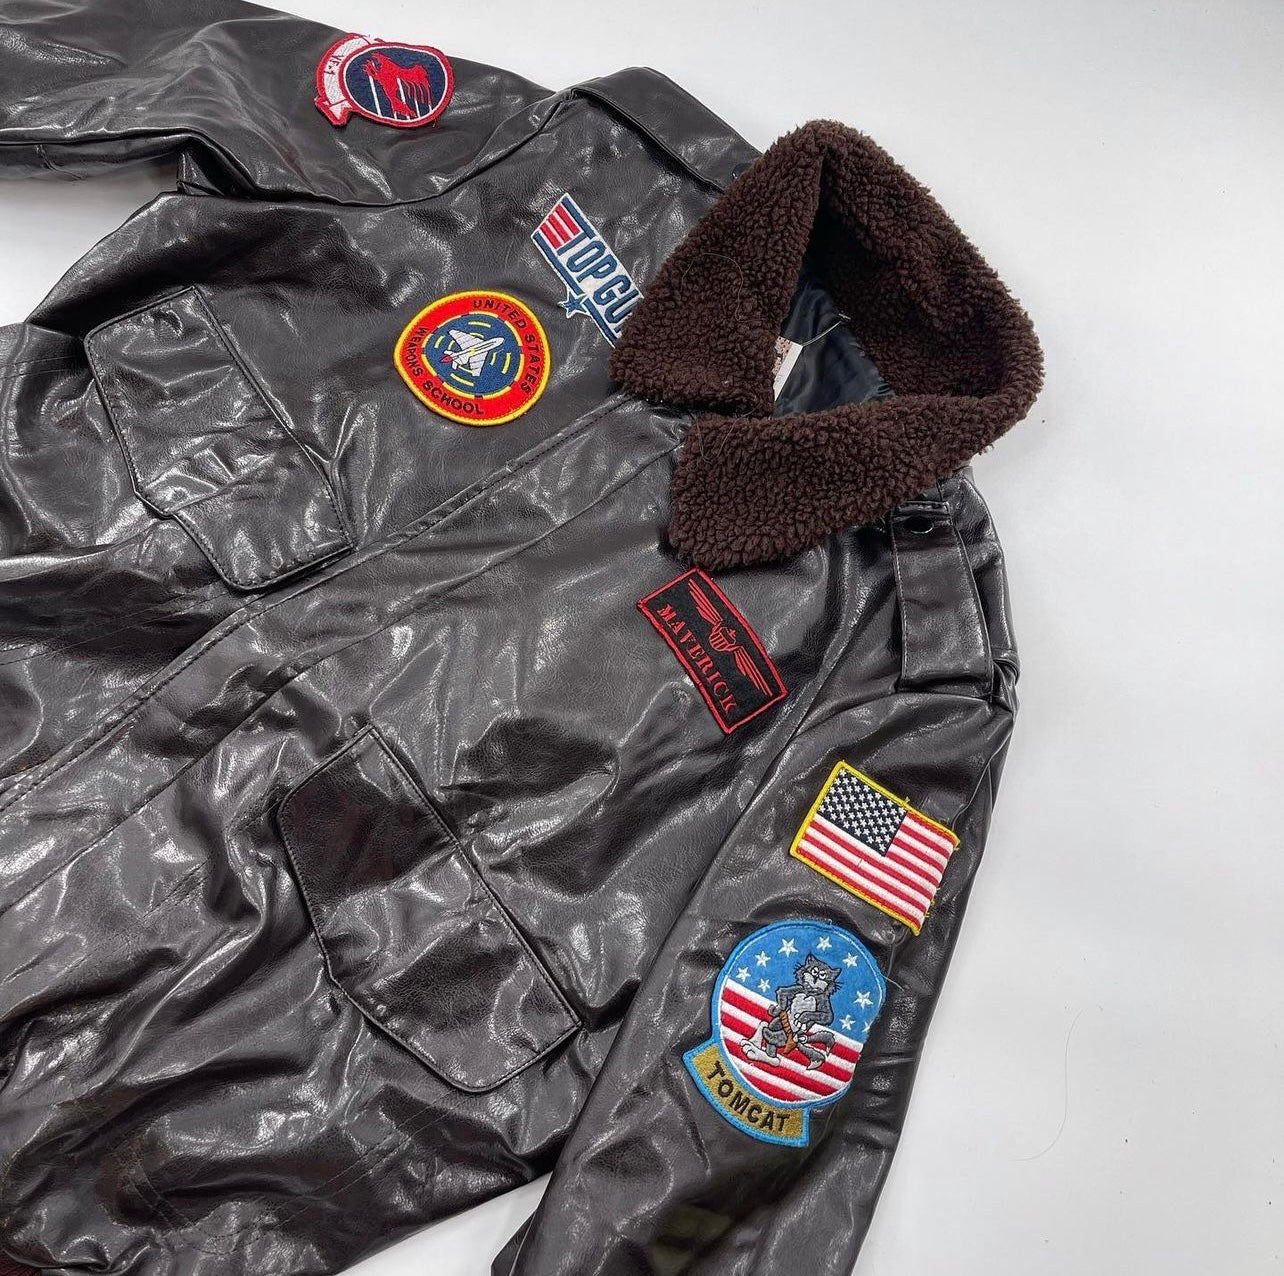 Vintage Dark Brown Top Gun Bomber Jacket with Patches and Teddy Sherpa Collar (Large)